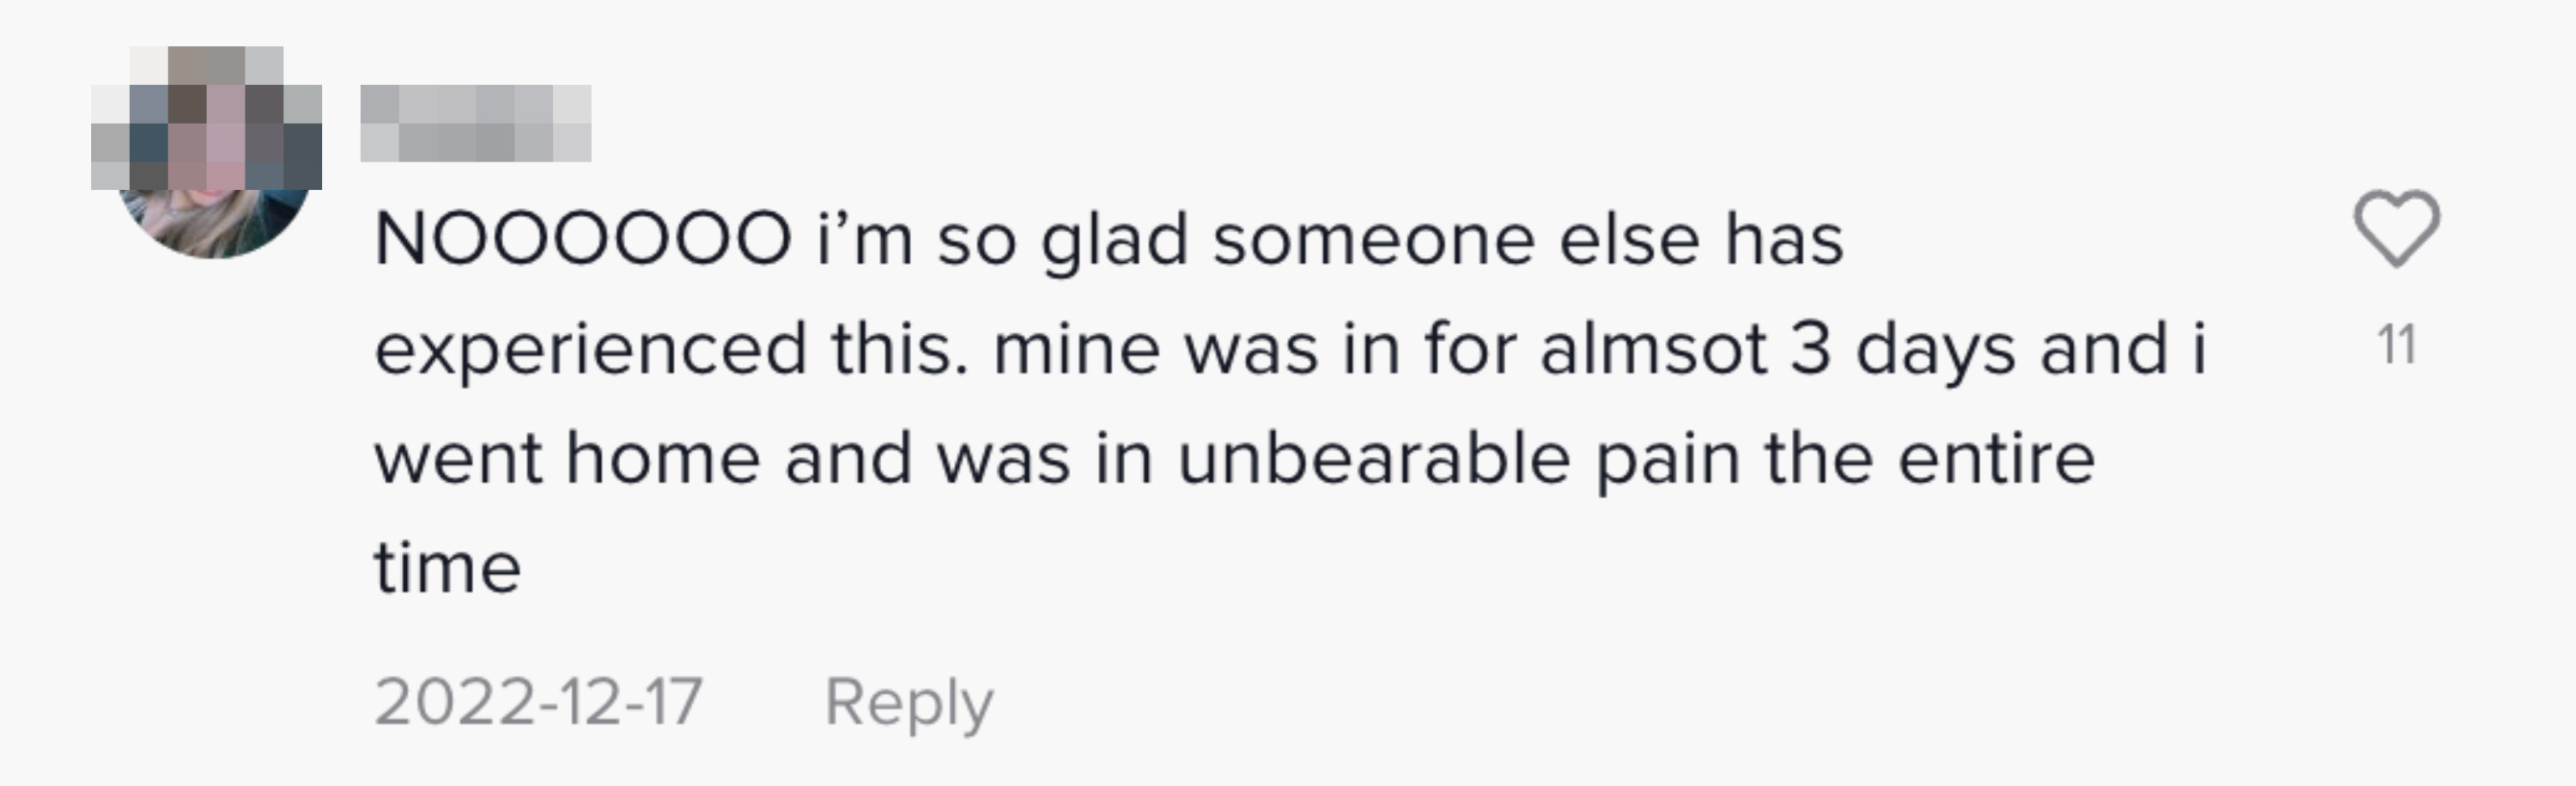 This person said &quot;NOOOOO I&#x27;m so glad someone else has experienced this. mine was in for almost 3 days and I went home and was in unbearable pain the entire time&quot;